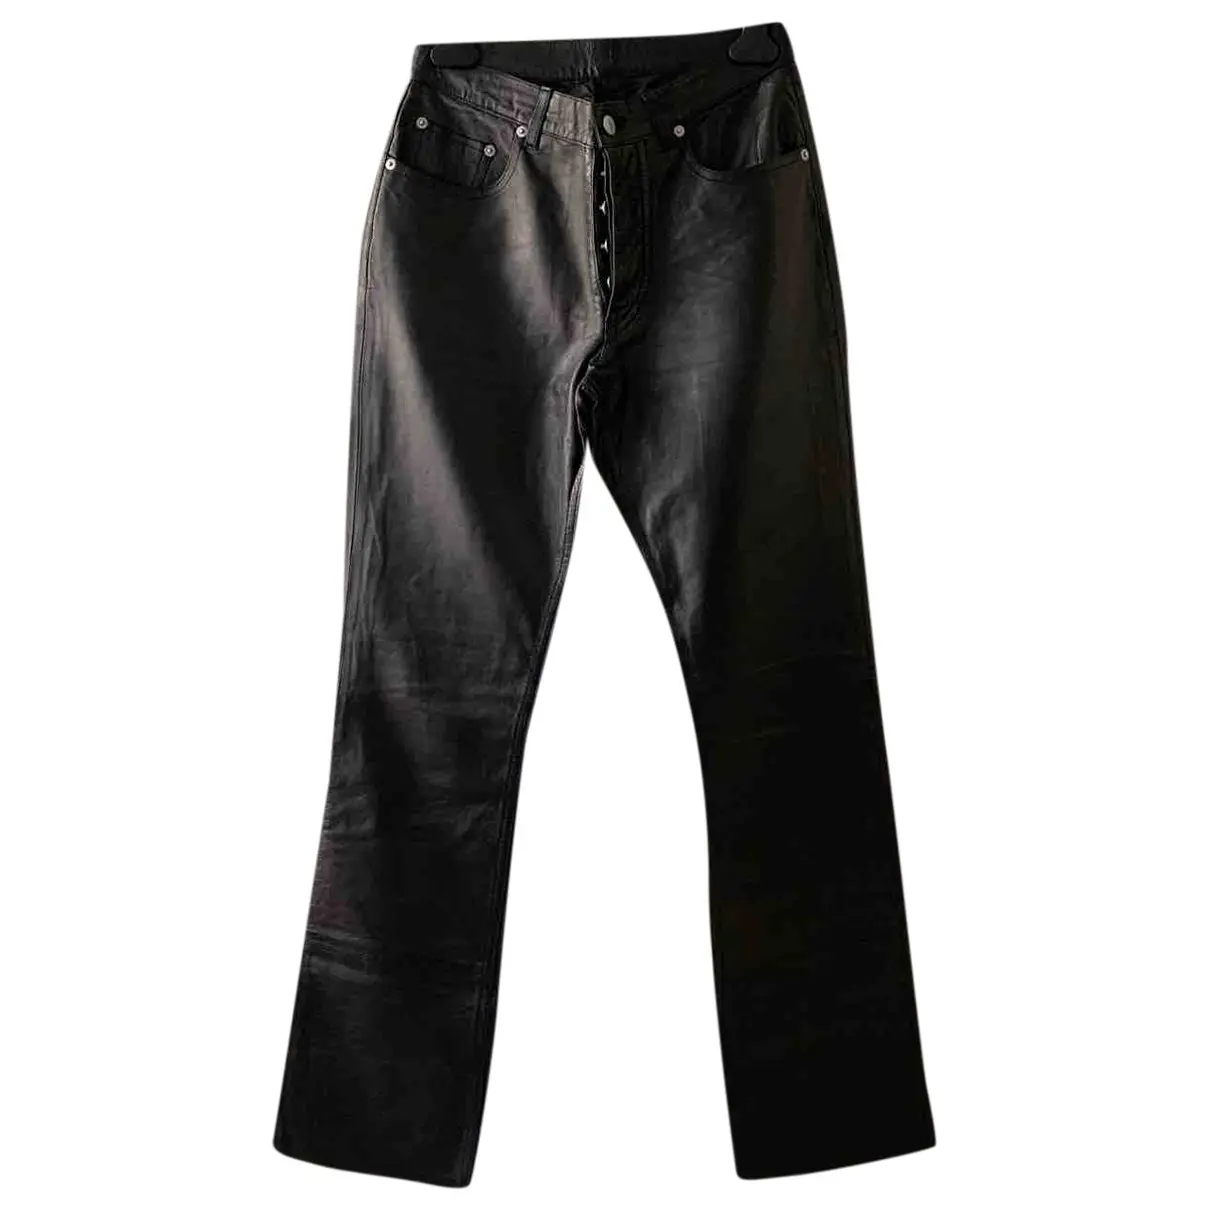 Leather trousers Helmut Lang - Vintage